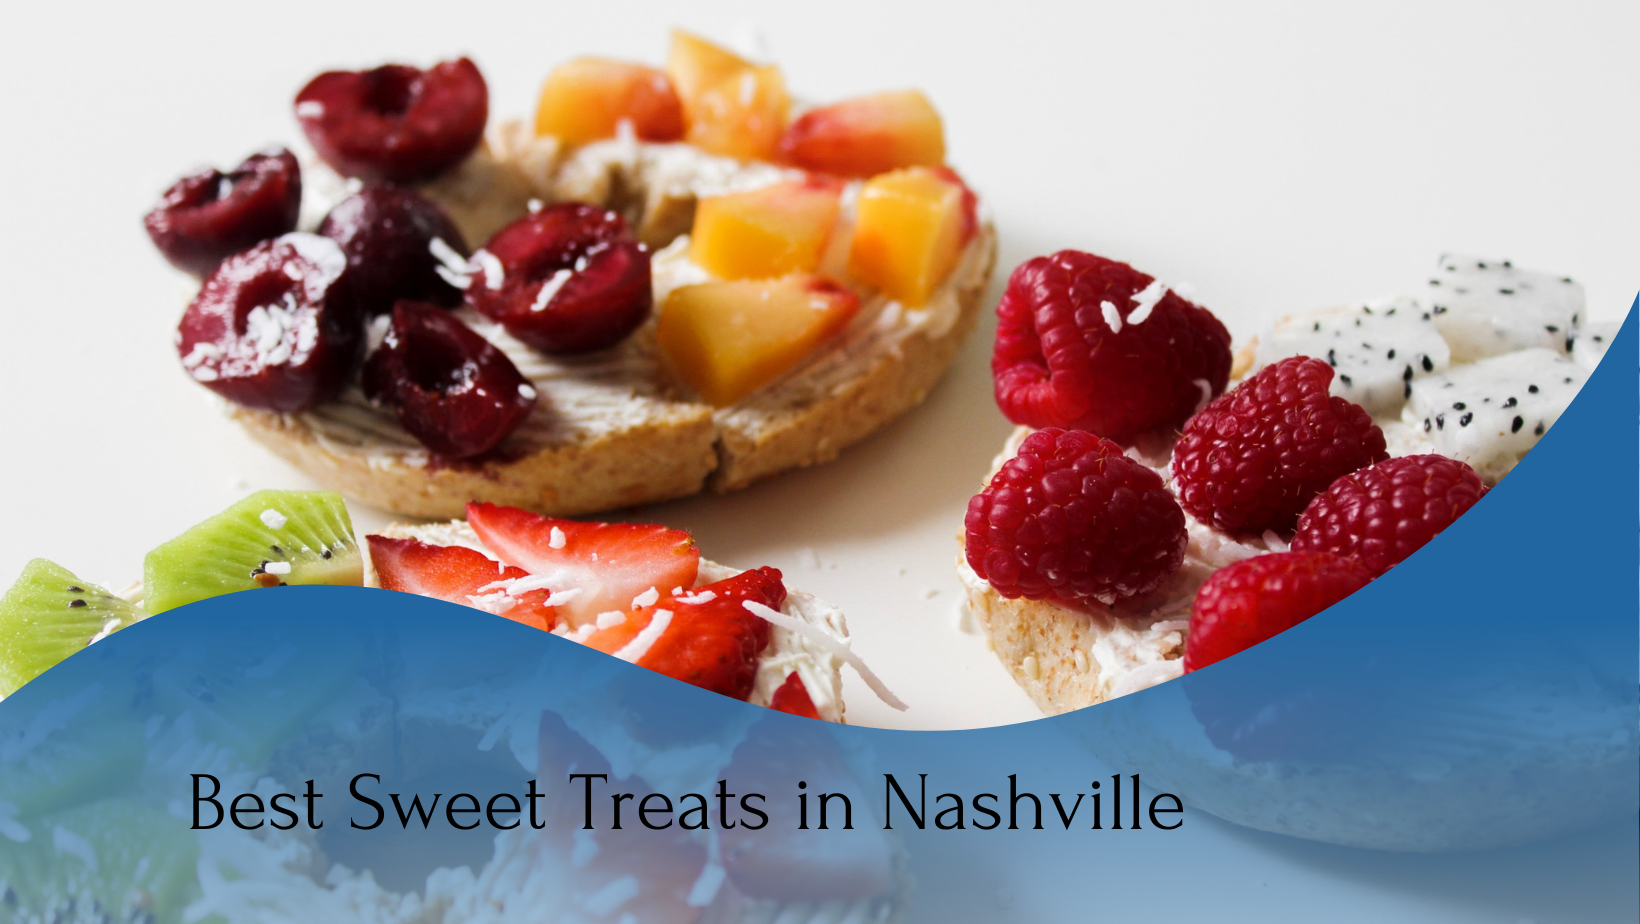 Assorted fruit tarts topped with fresh berries, kiwi, and dragon fruit, presented with a text overlay reading "best sweet treats in nashville.